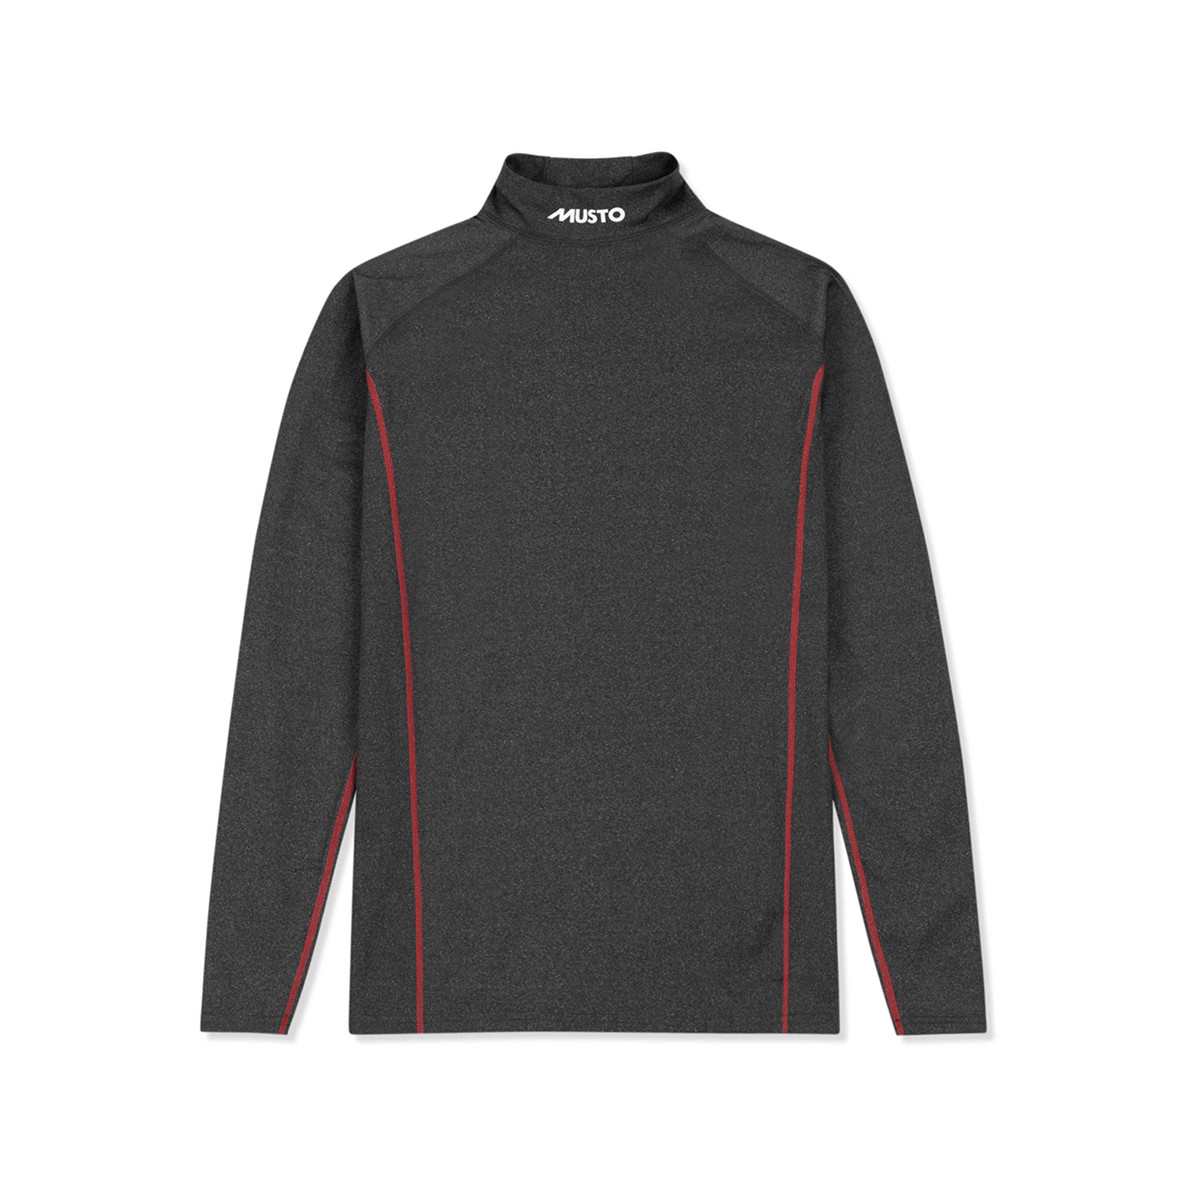 Musto Thermo Base-Layer Longsleeve heren donkergrijs, maat M